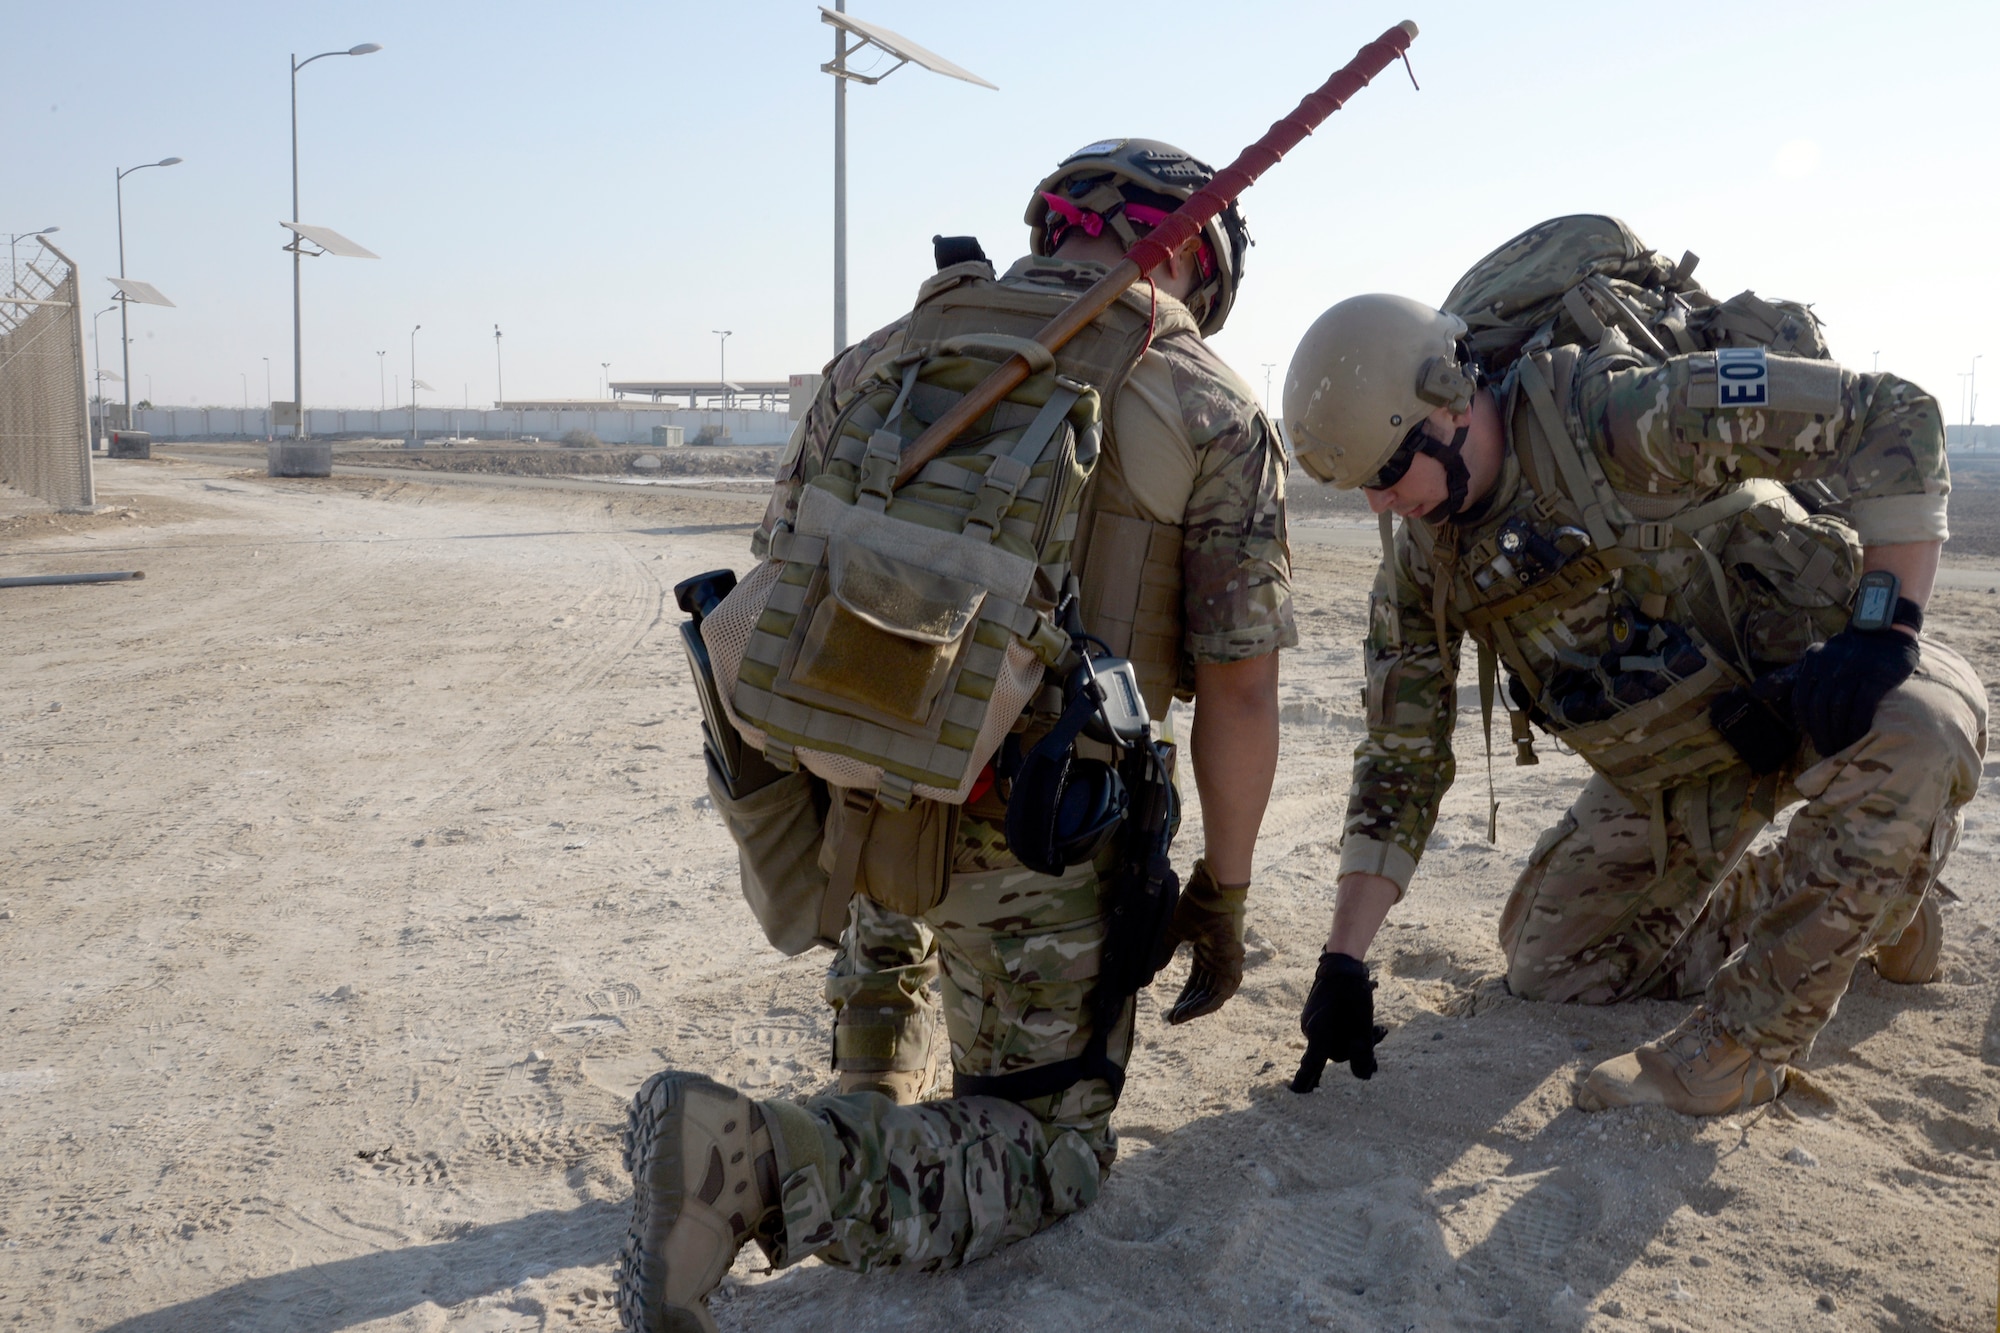 Staff Sgt. Ace, right, and Senior Airman Paola, explosive ordnance disposal technicians, strategize their movement while on foot patrol during a training exercise at an undisclosed location in Southwest Asia Dec. 30, 2014. Airmen who work in the EOD flight are required to think outside the box and accept nothing less than perfection when performing their duties. Ace is currently deployed from Joint Base Elmendorf-Richardson, Ala., and Paola is currently deployed from Fairchild Air Force Base, Wash. (U.S. Air Force photo/Tech. Sgt. Marie Brown)